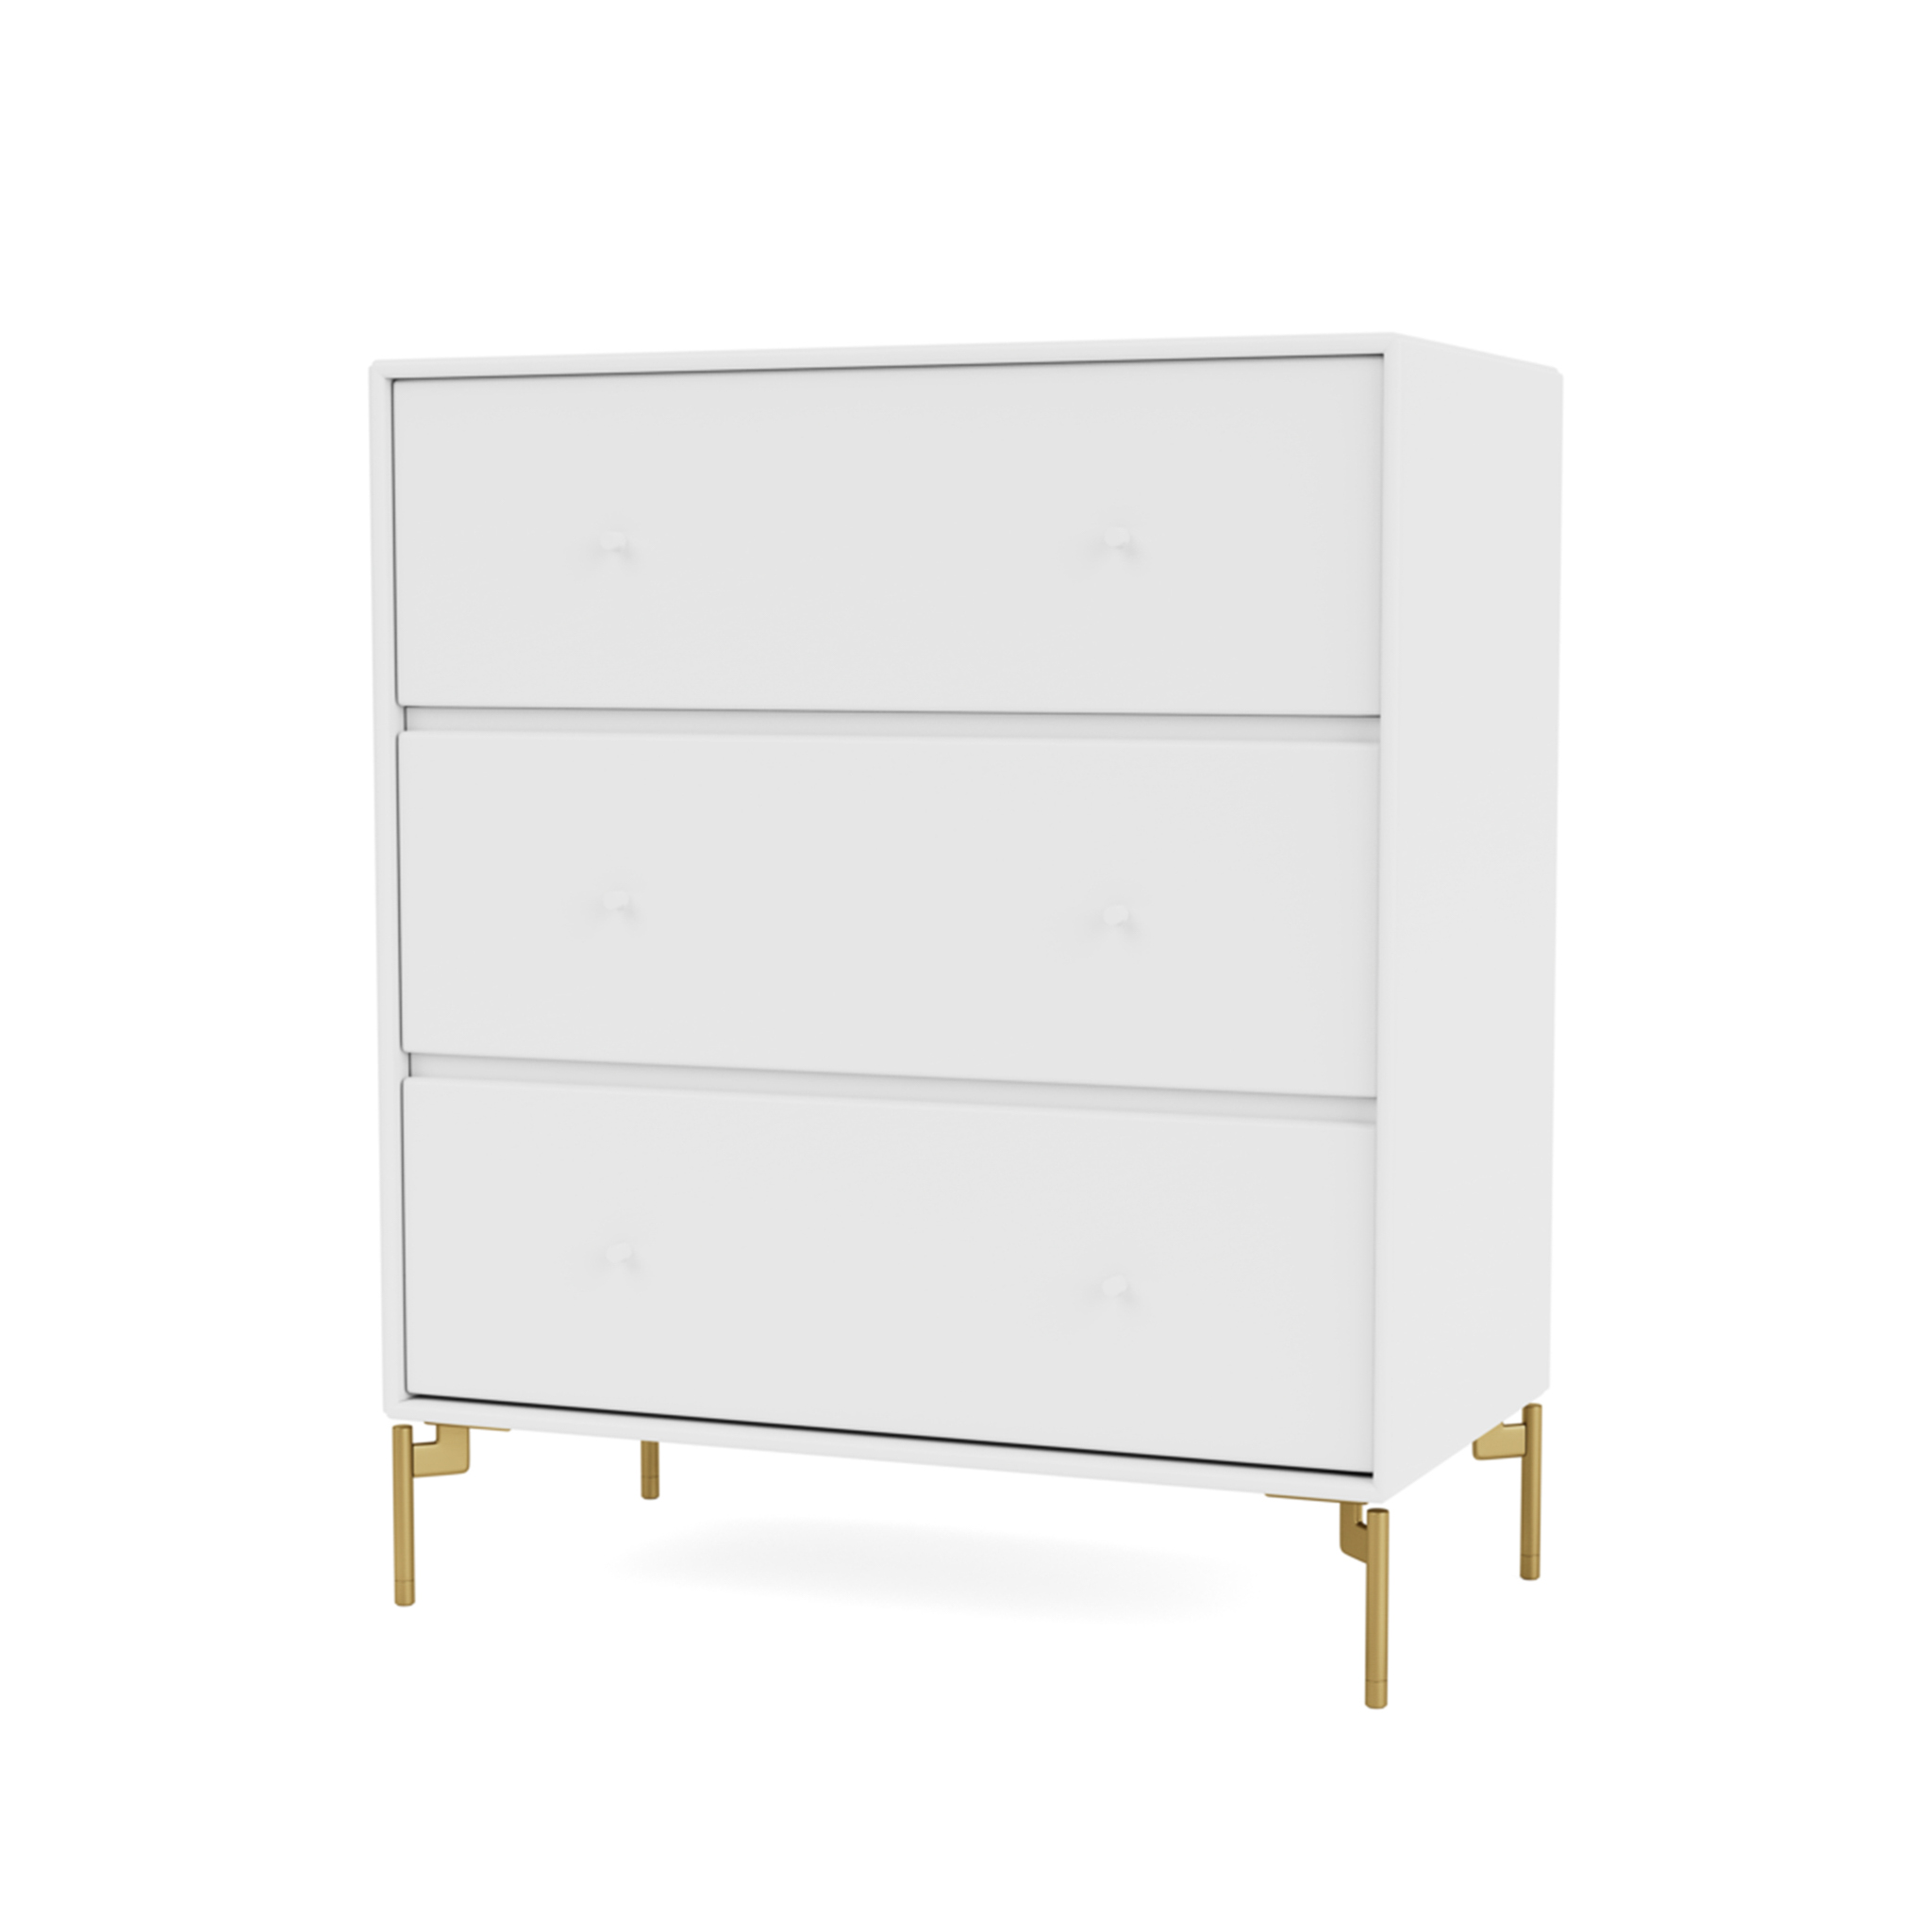 MONTANA // CARRY - CHEST OF DRAWERS WITH 3 DRAWERS